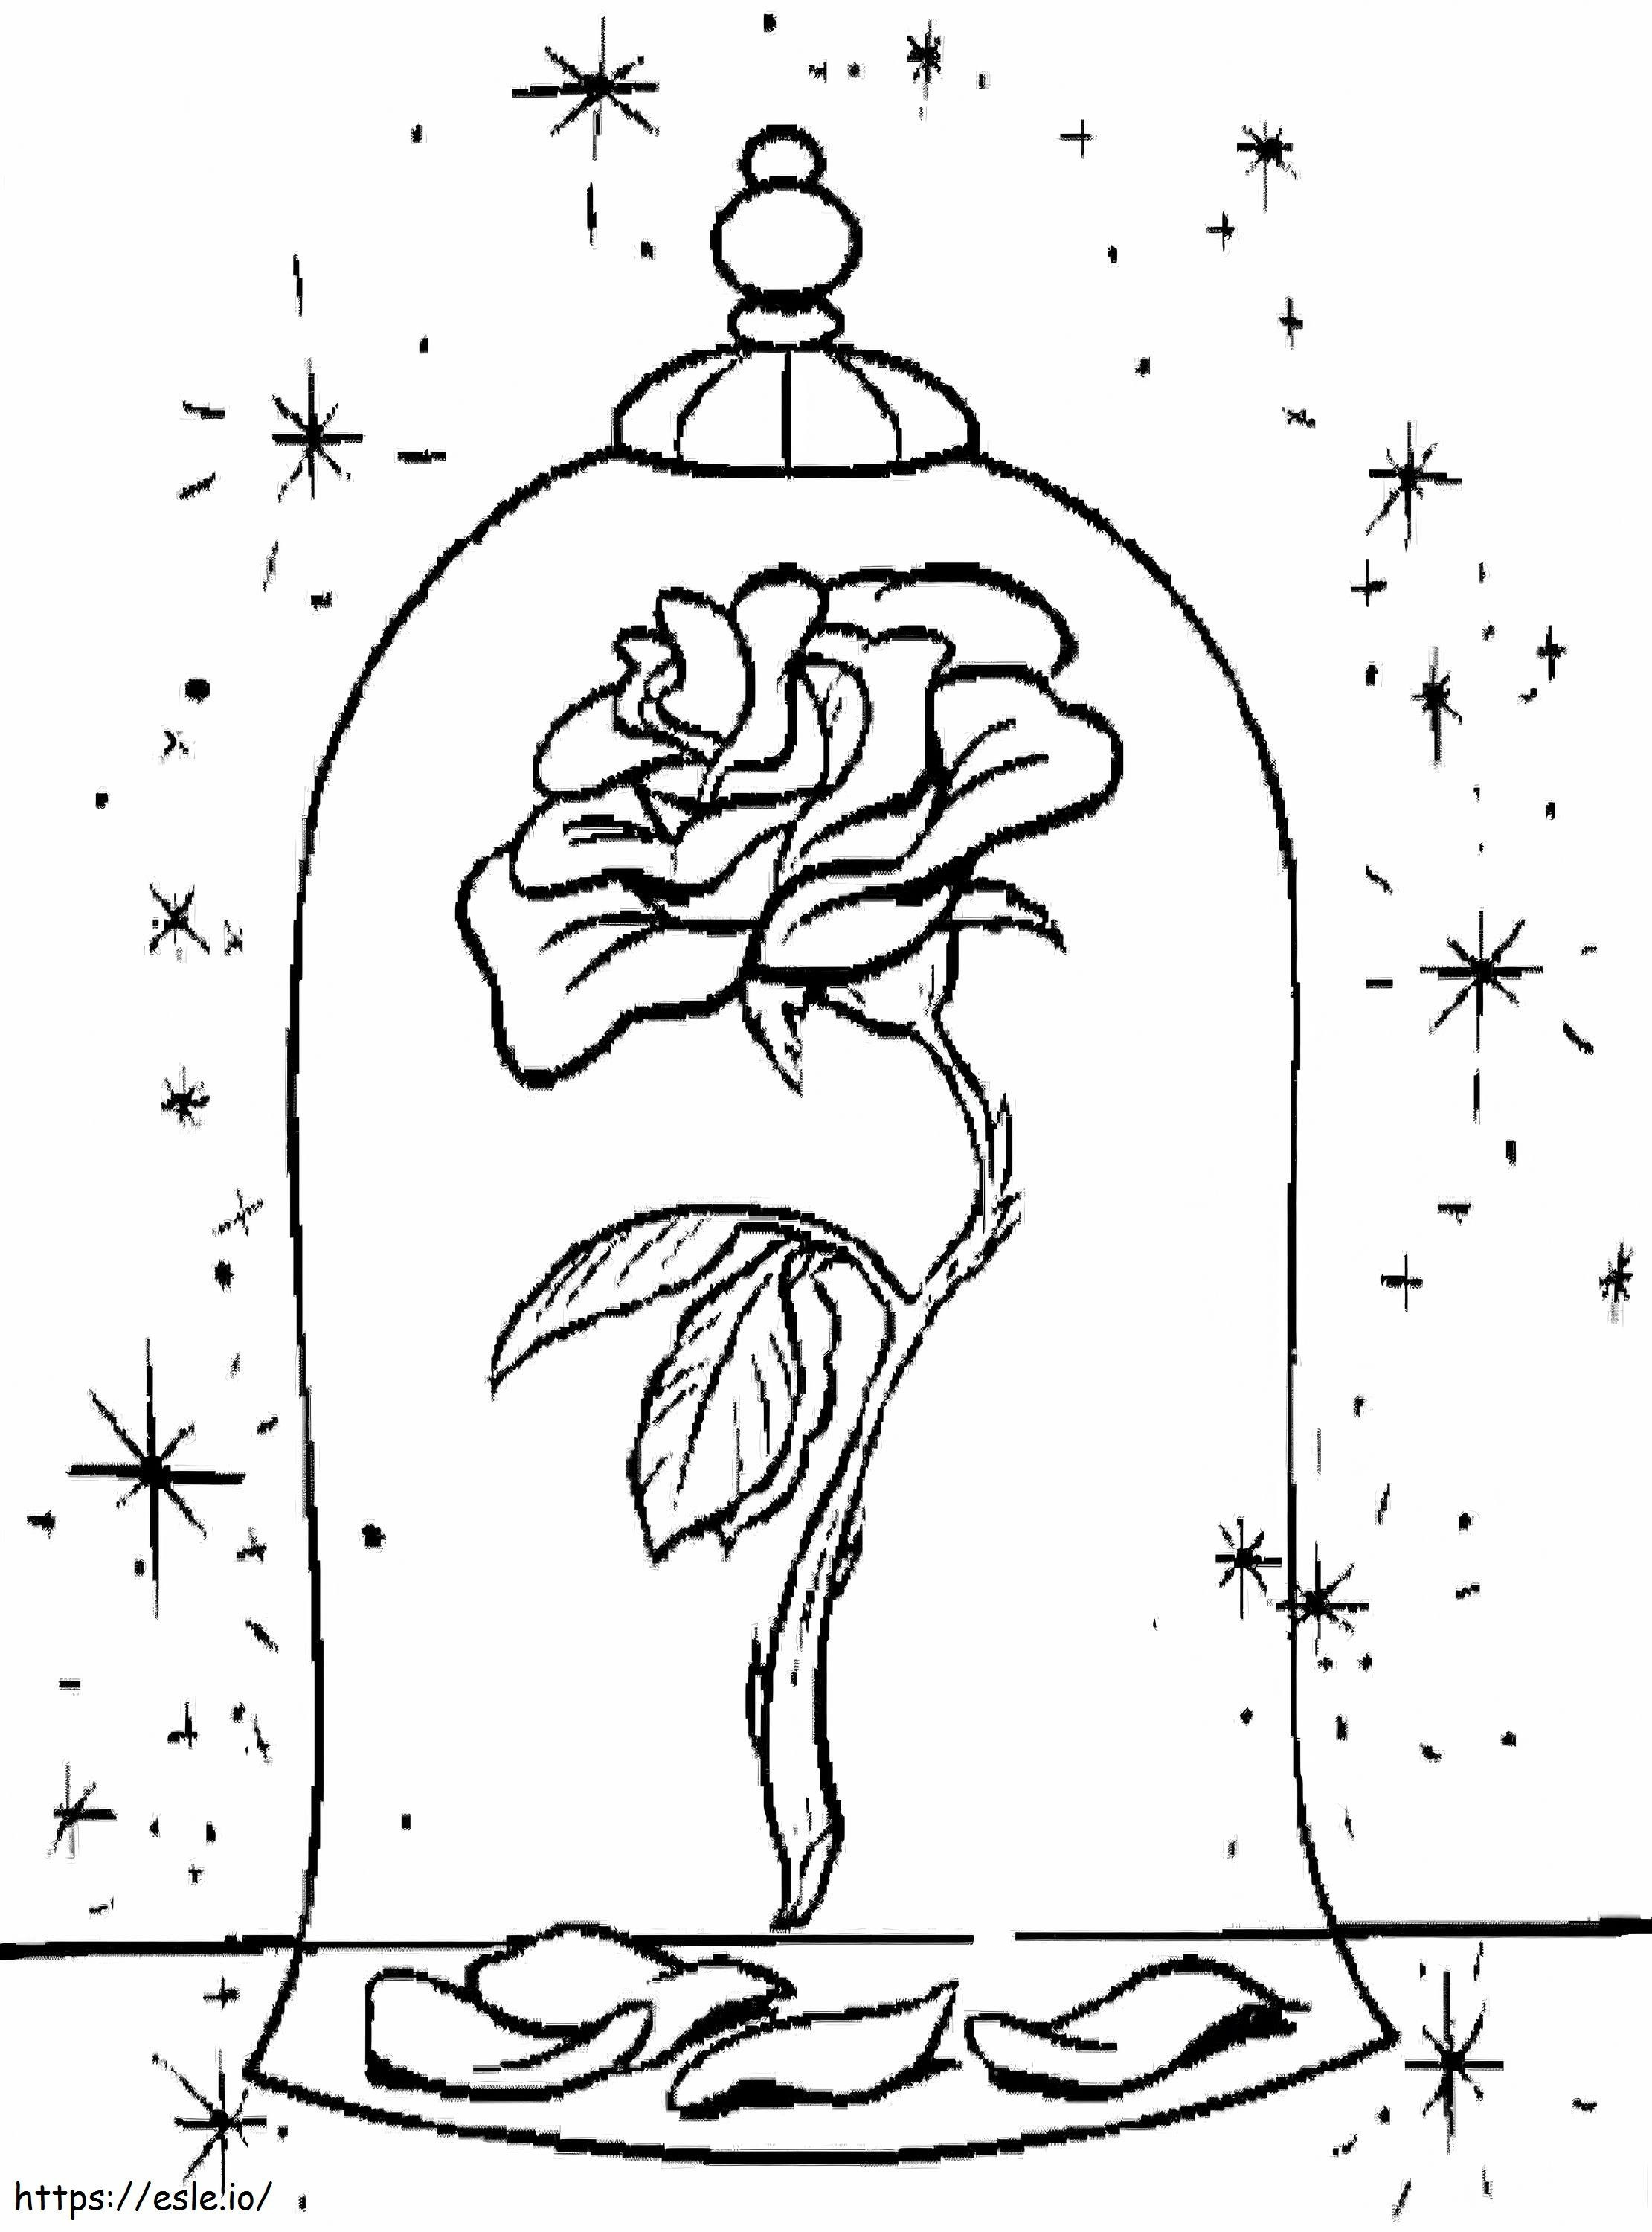  Beauty And The Beast Rose Drawing 68154 Beauty And The Beast Rose Drawing Free Printable Of Beauty And The Beast Rose Drawing Skala 2 Gambar Mewarnai